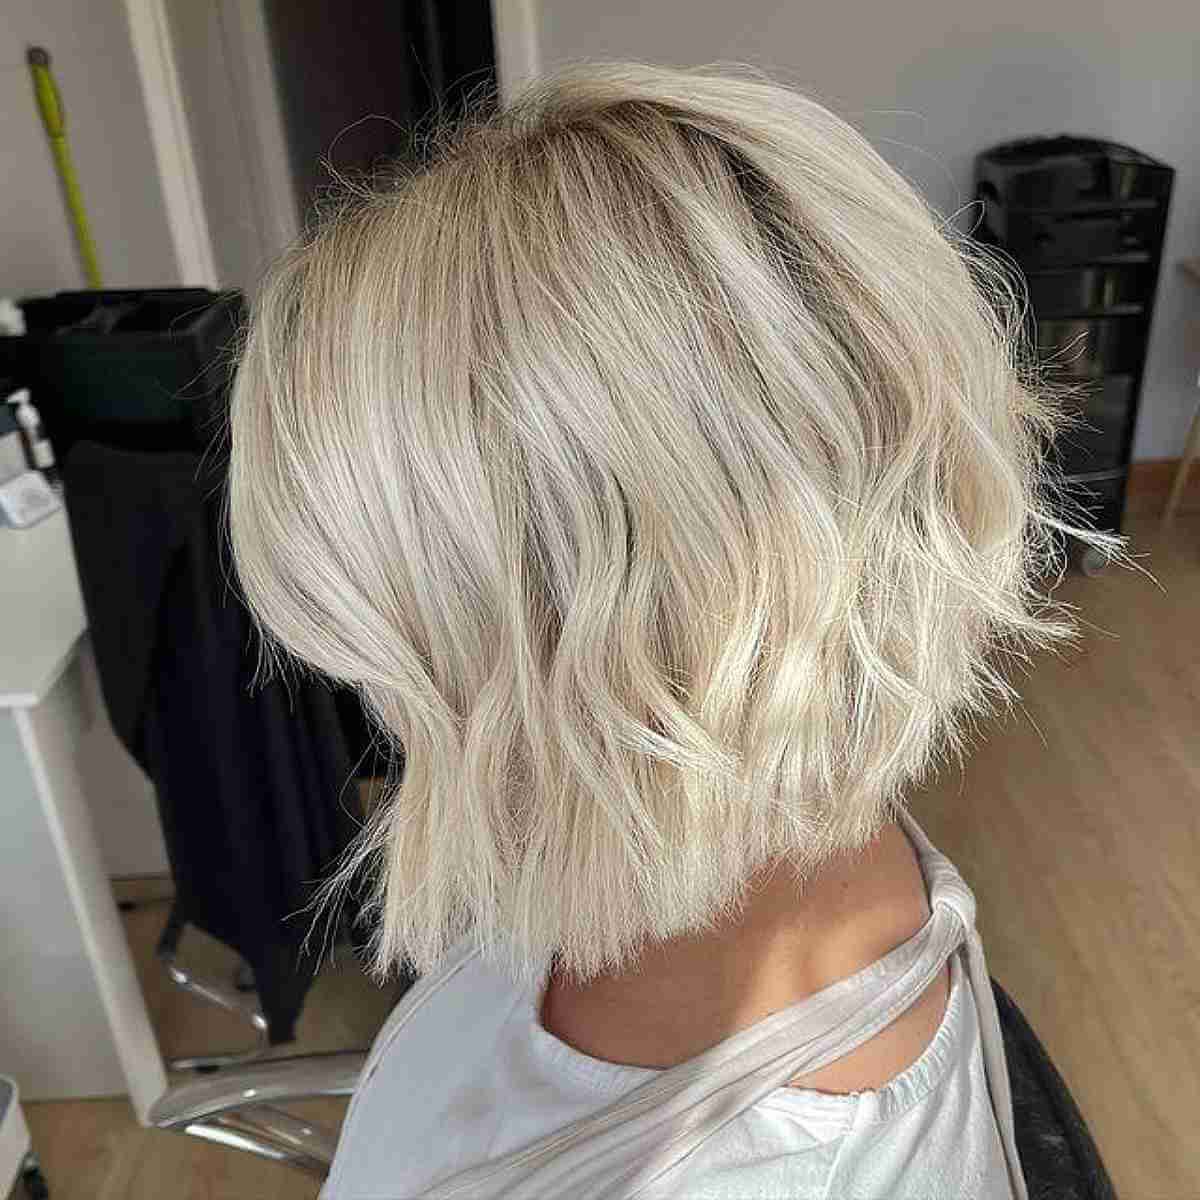 50+ Inverted Bob Haircuts Women Are Getting In 2022 With Messy, Wavy &amp; Icy Blonde Bob Hairstyles (View 19 of 25)